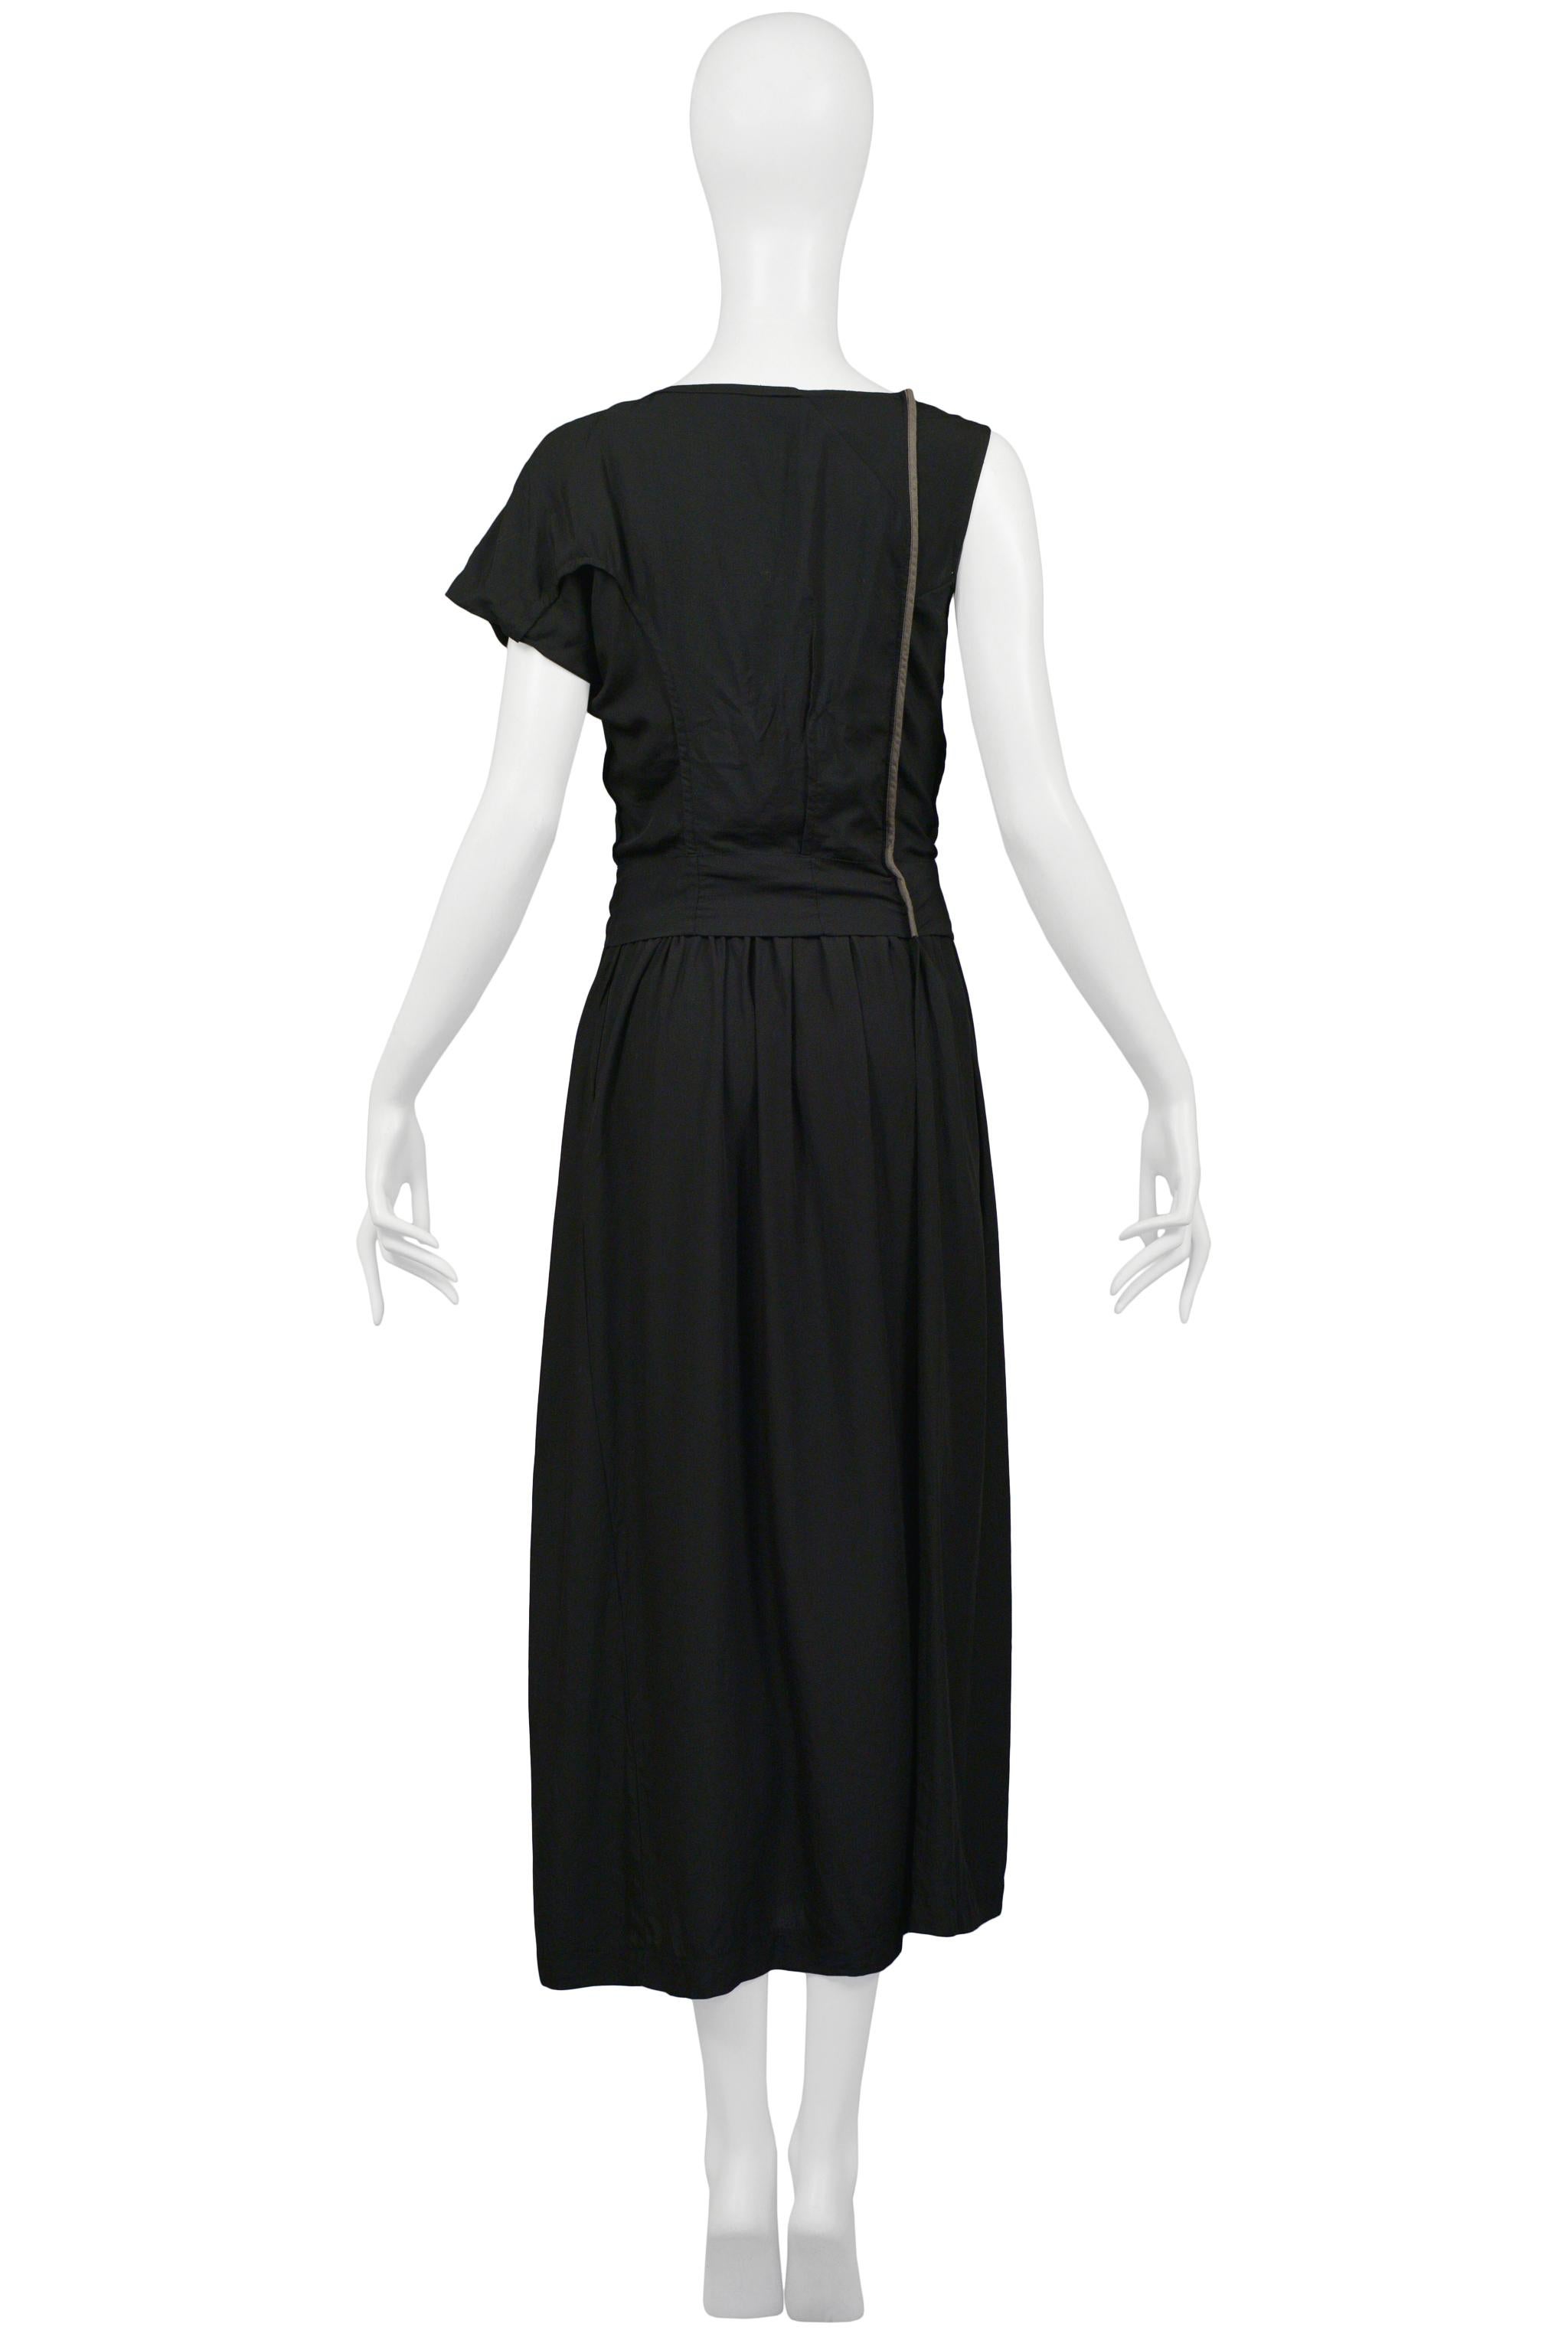 Comme Des Garcons Black & Taupe Deconstructed Rayon Gown 1998 In Excellent Condition For Sale In Los Angeles, CA